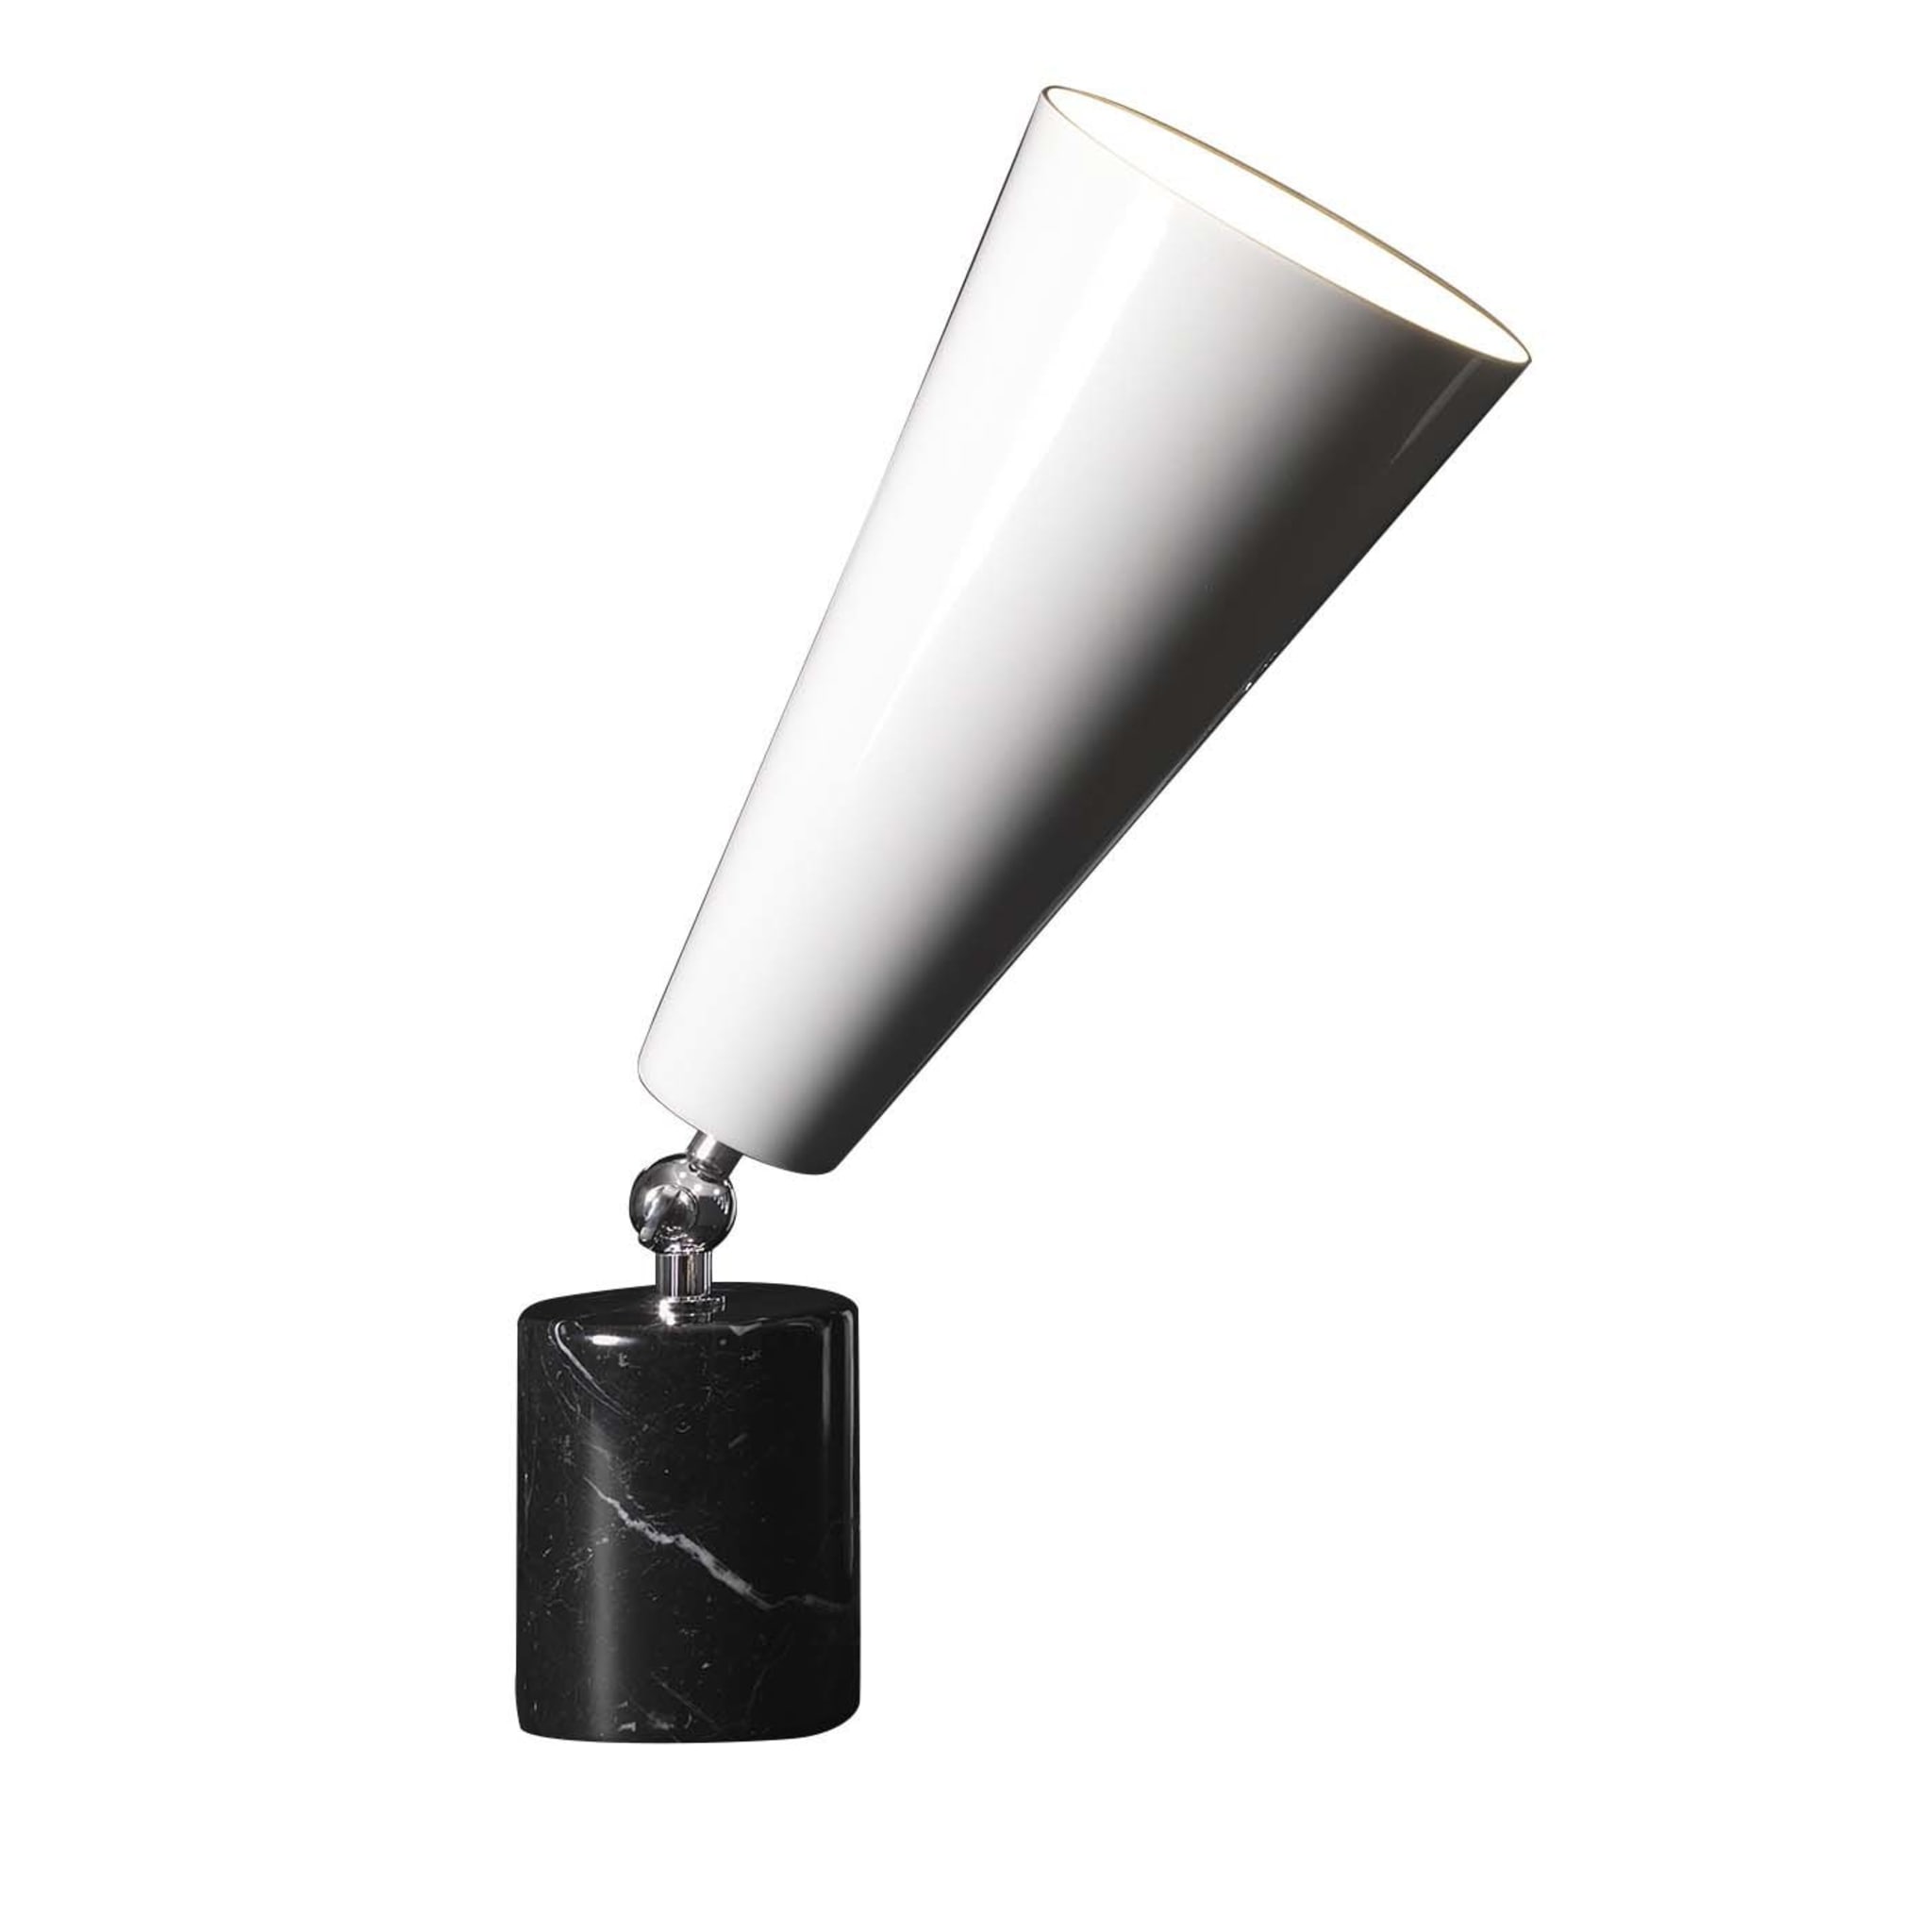 Vox Bassa Table Lamp by Lorenza Bozzoli in Marquina Marble - Main view